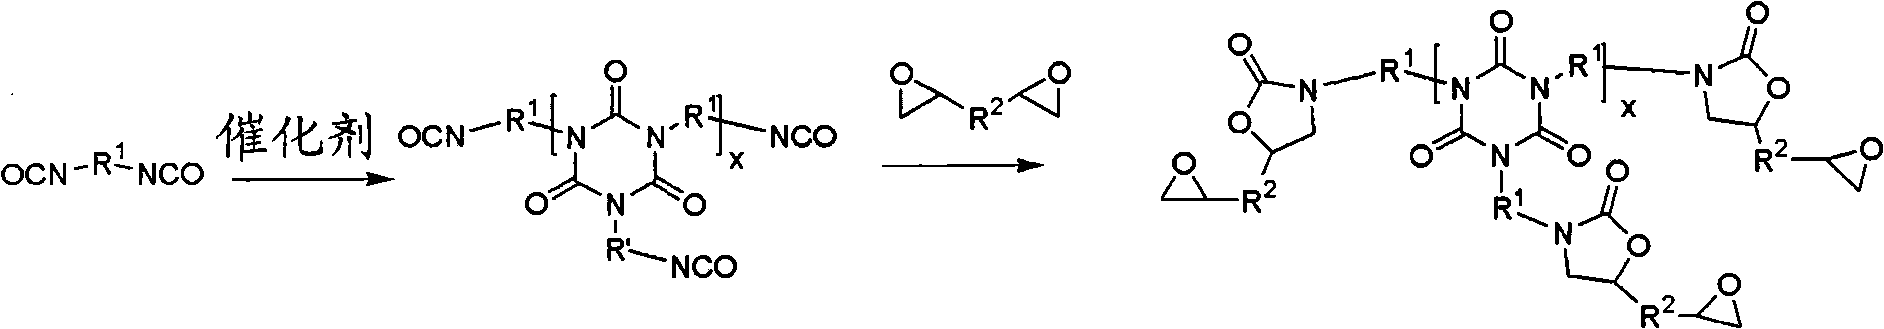 Epoxy resin composition containing isocyanurates for use in electrical laminates